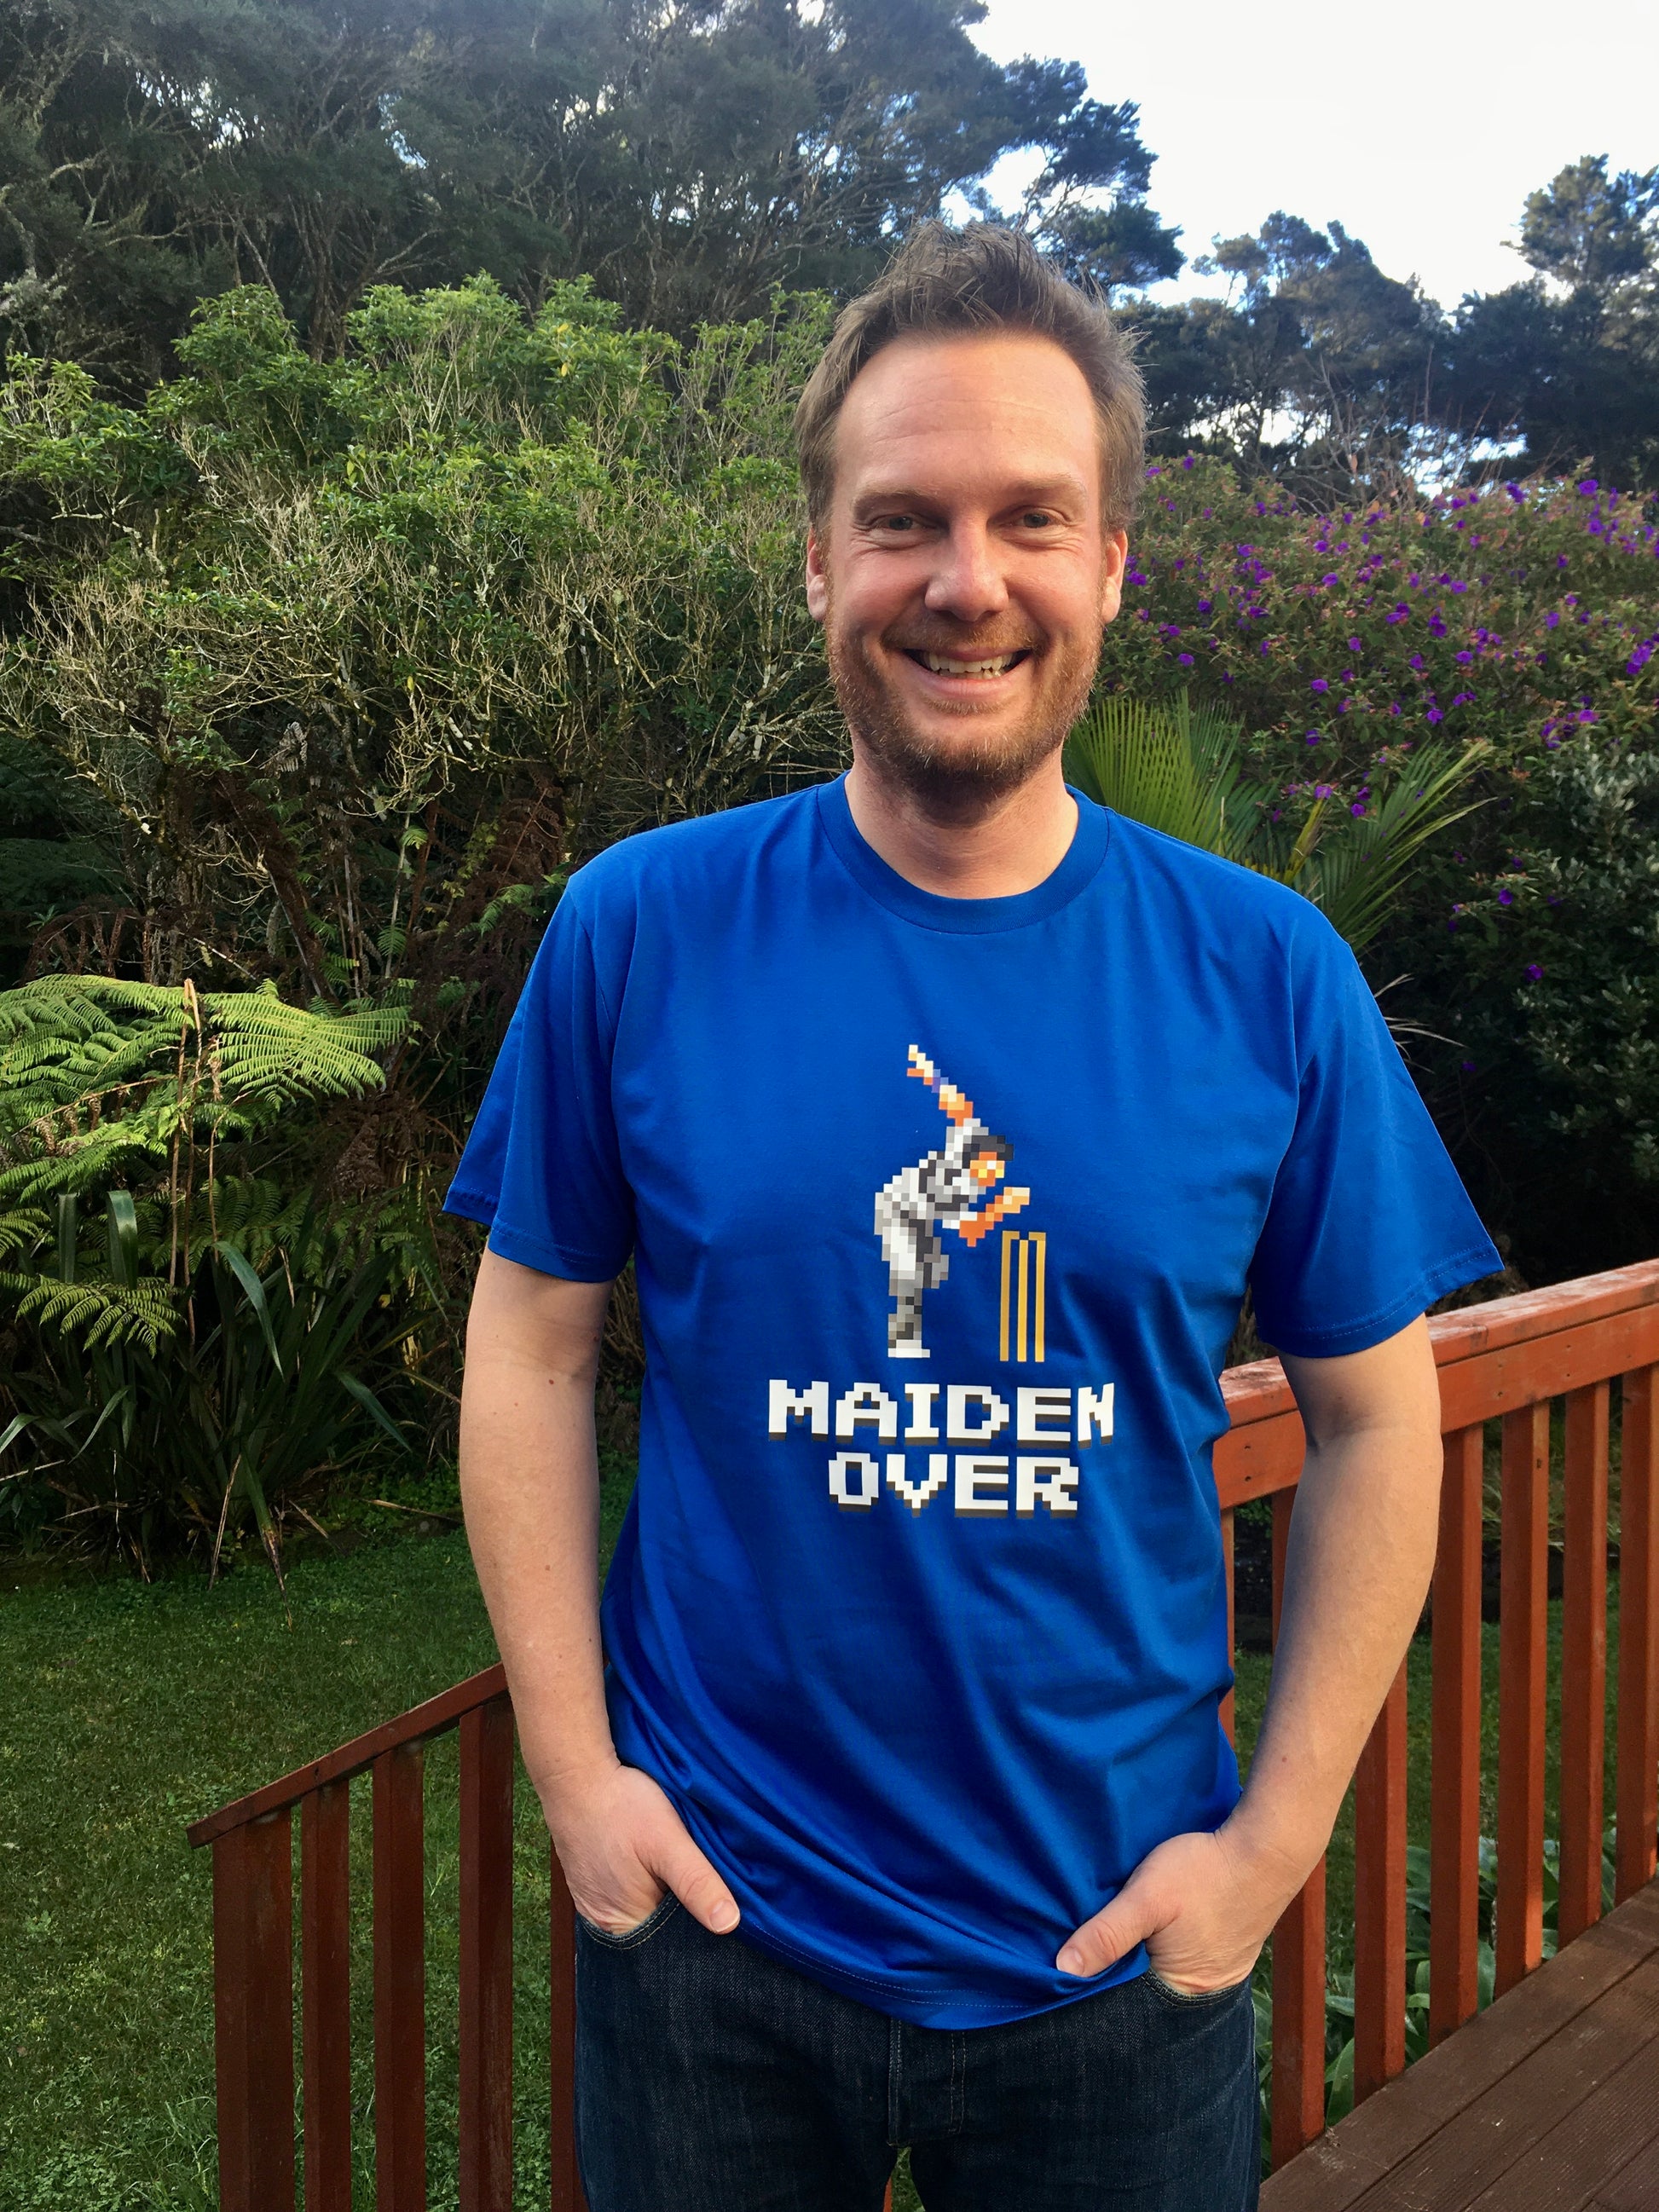 Maiden Over cricket blue t-shirt large